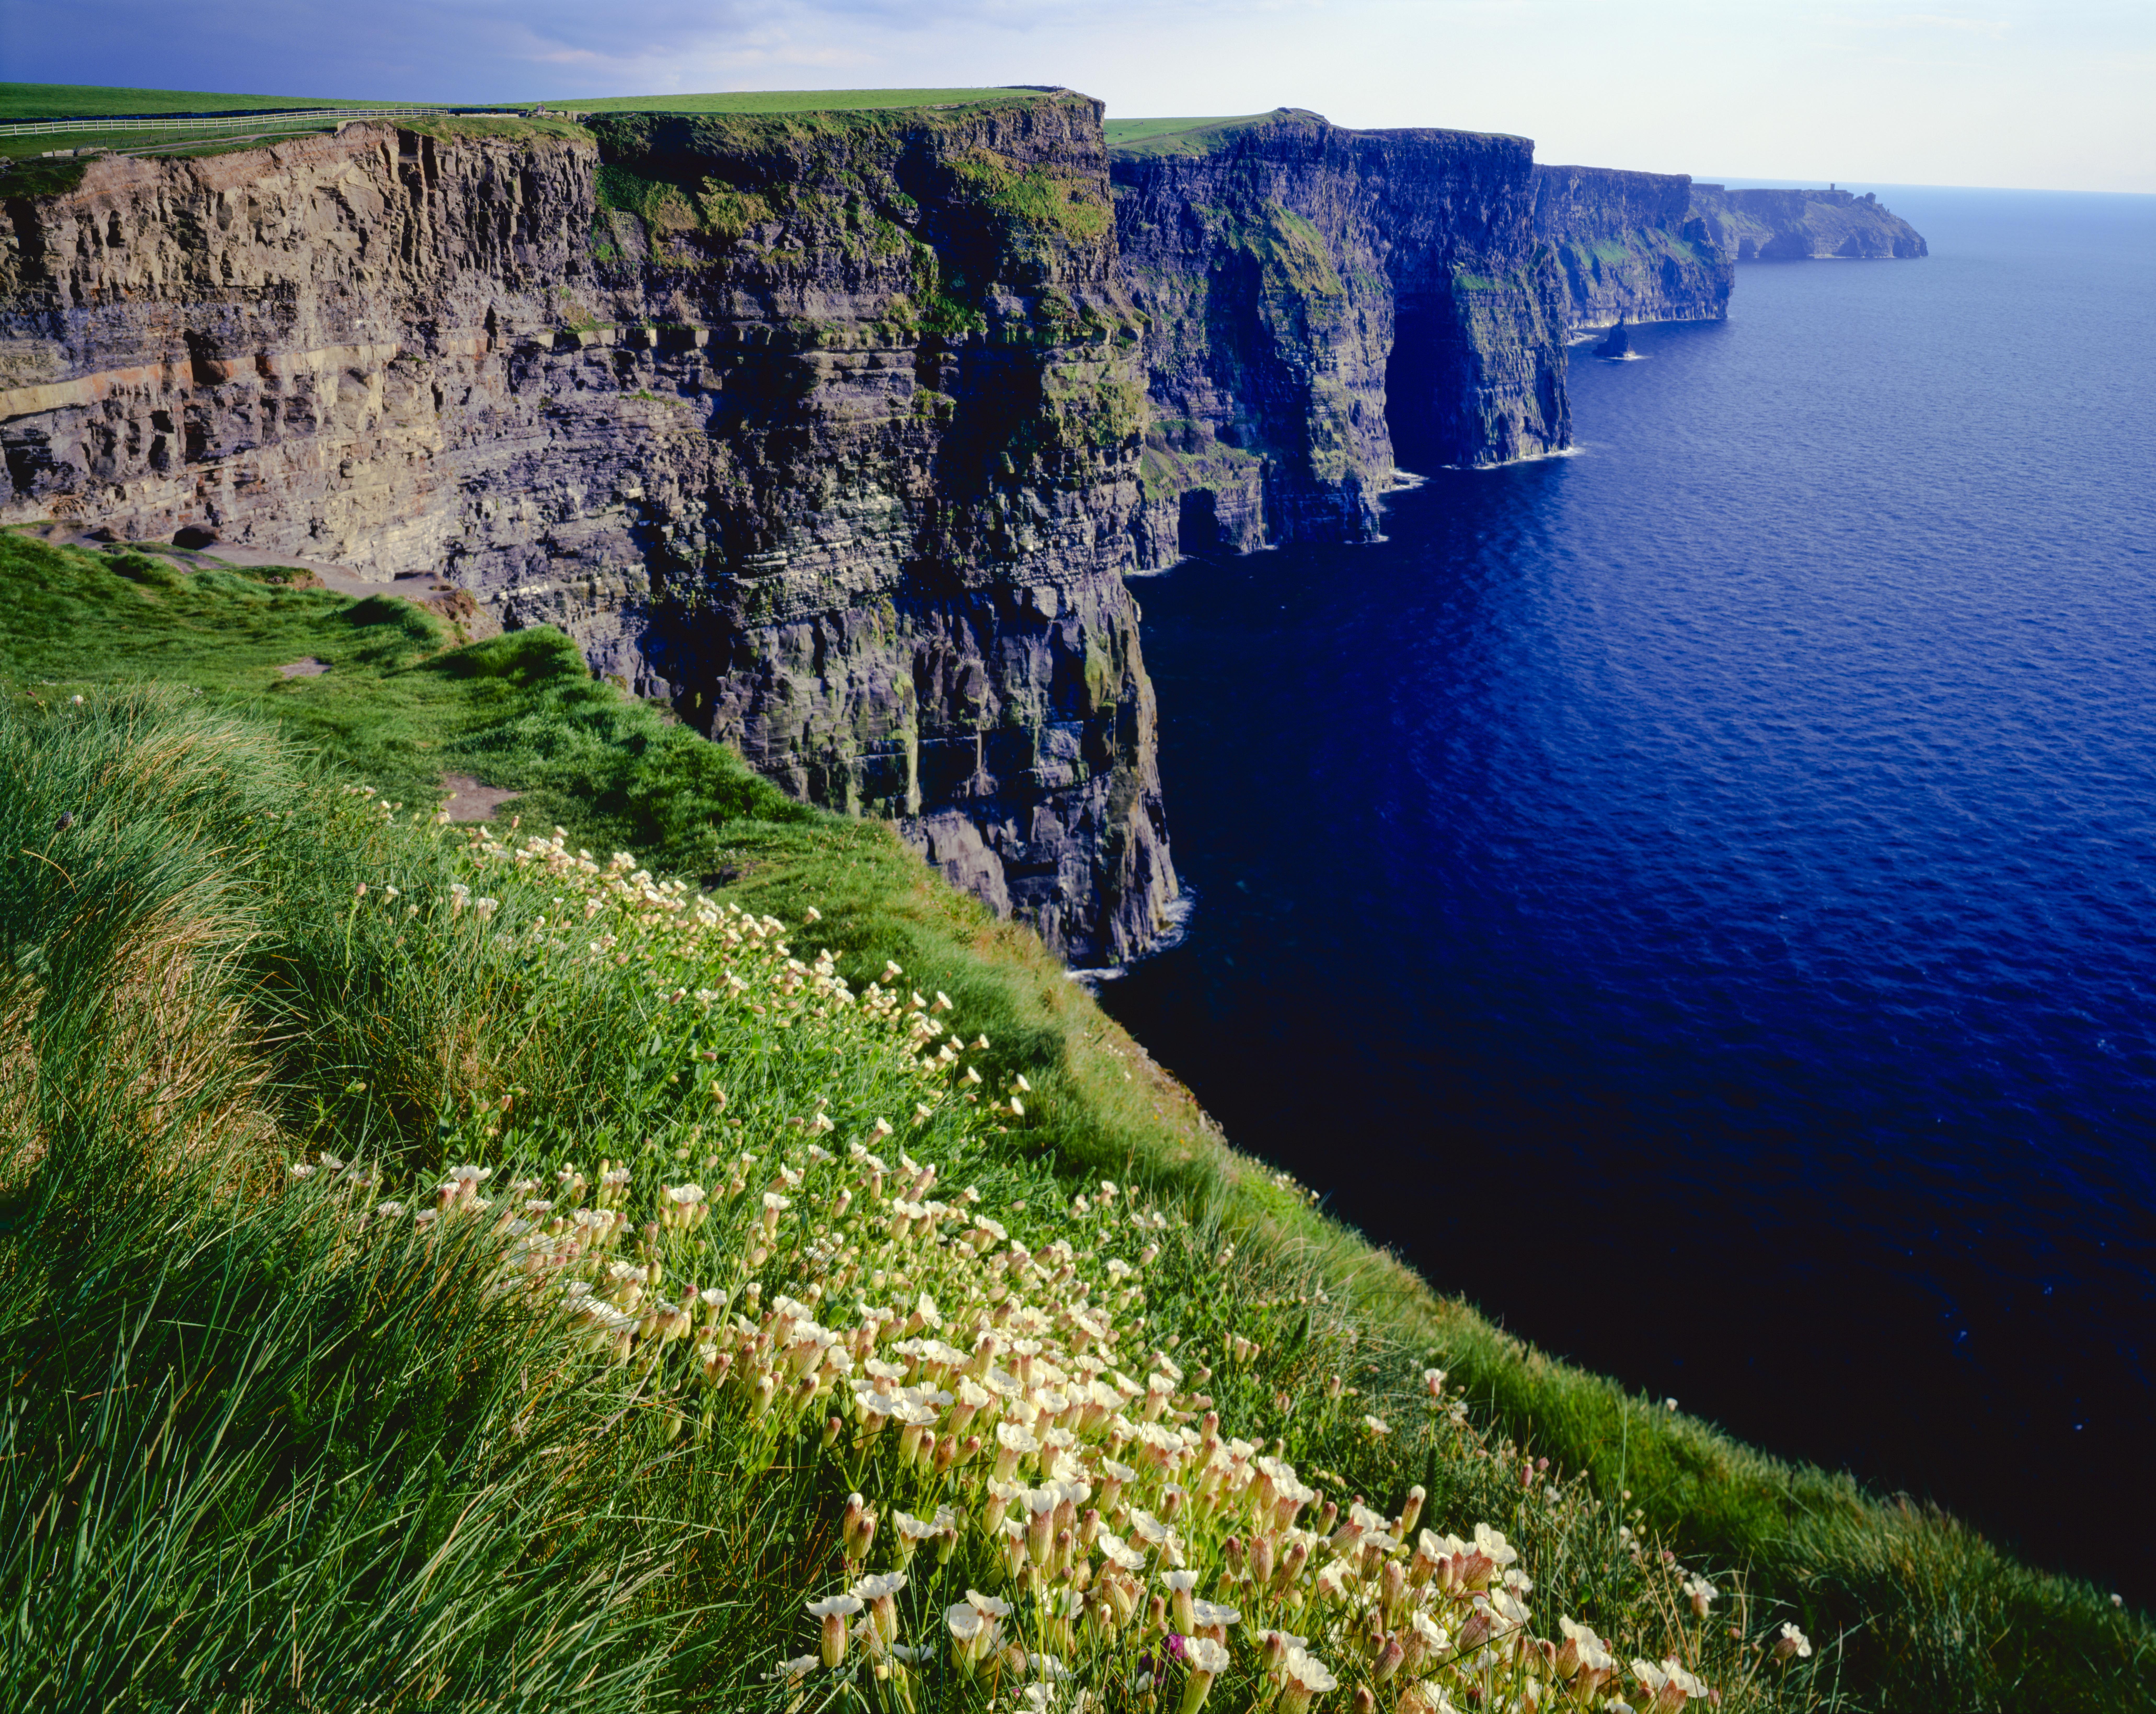 Cliffs of Moher Republic of Ireland, Photographed by Tom Till